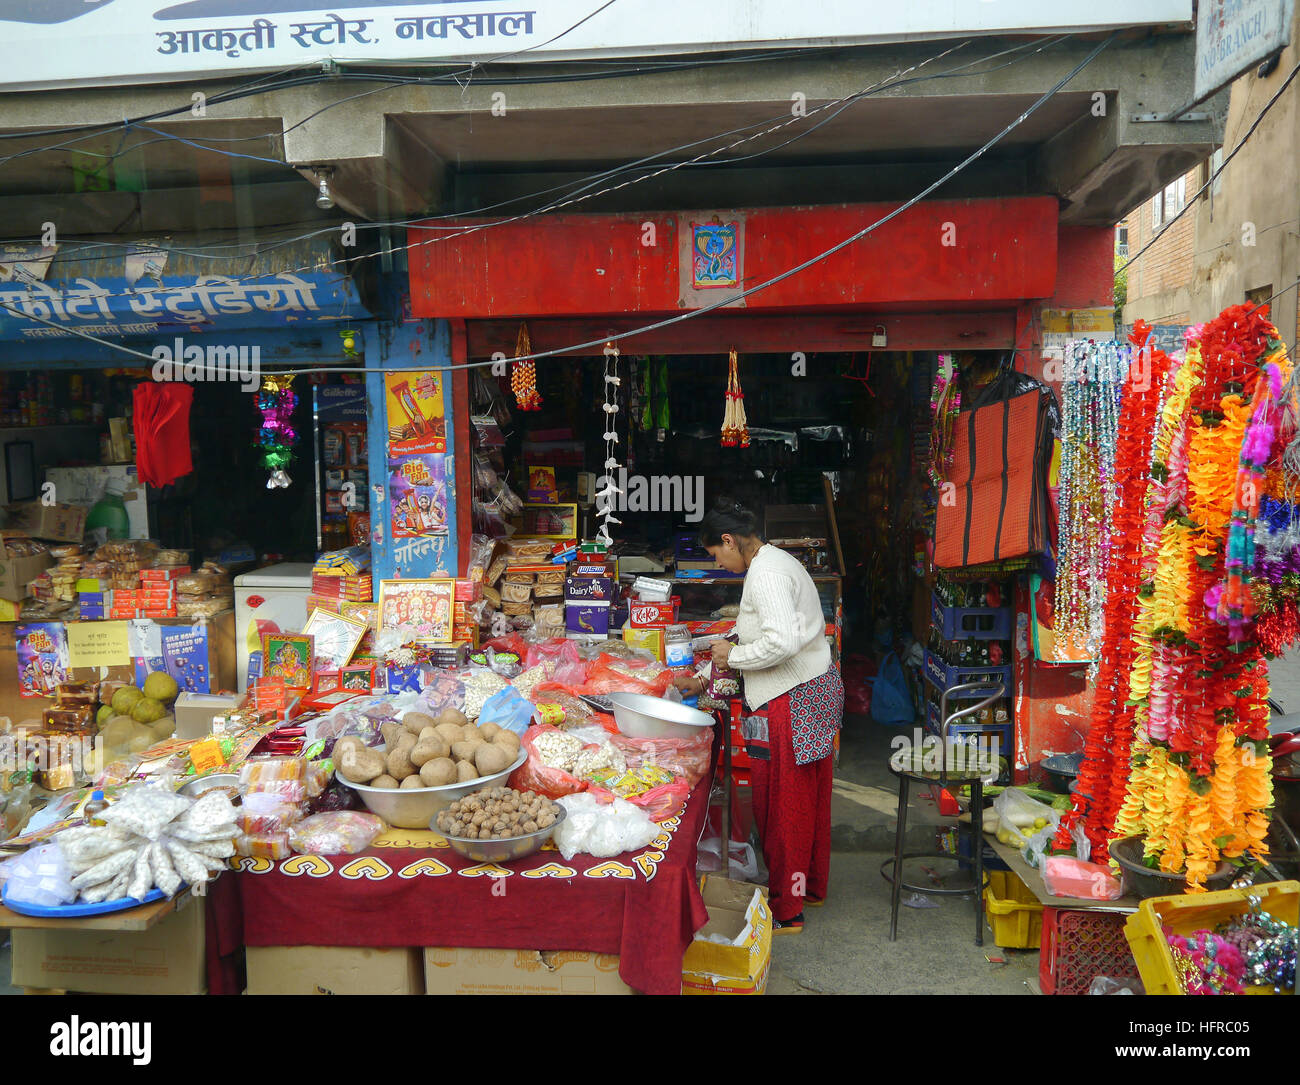 A Nepalese Woman Shopkeeper Selling Goods from a Her Shop for the Festival of Light (Deepawali) in Kathmandu, Nepal.Asia. Stock Photo